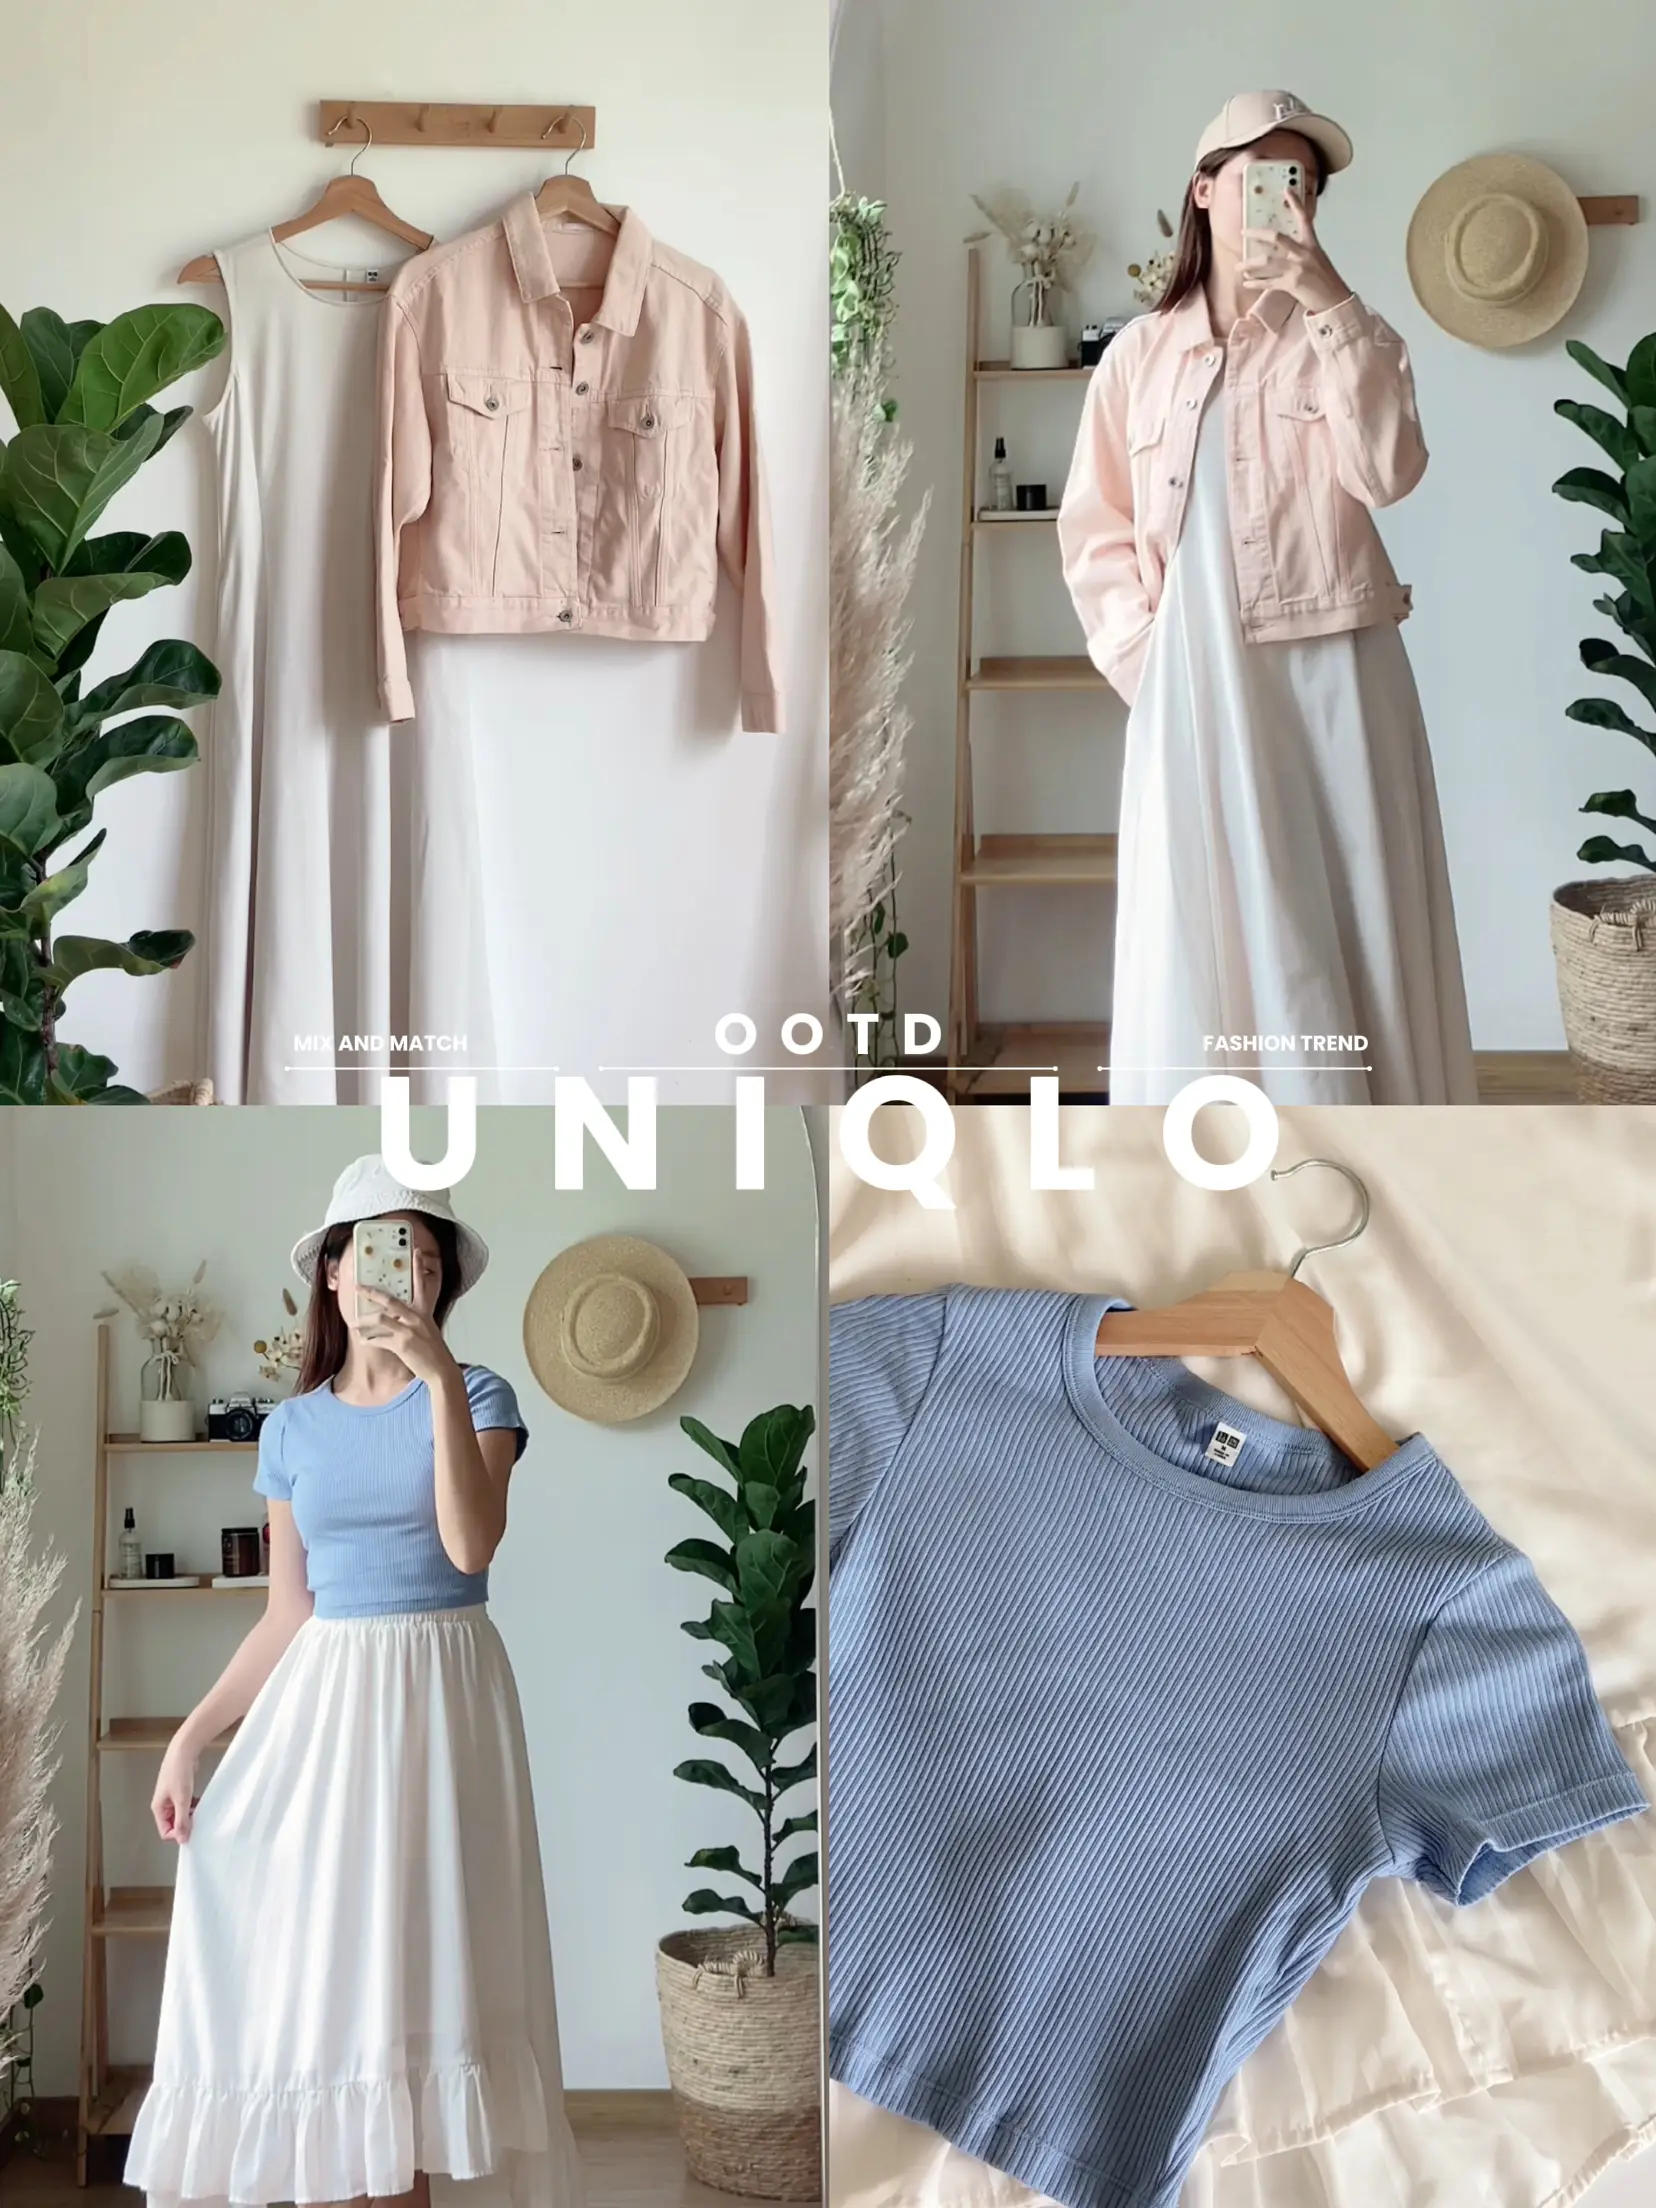 Modest outfit inspo with Uniqlo clothing 👚